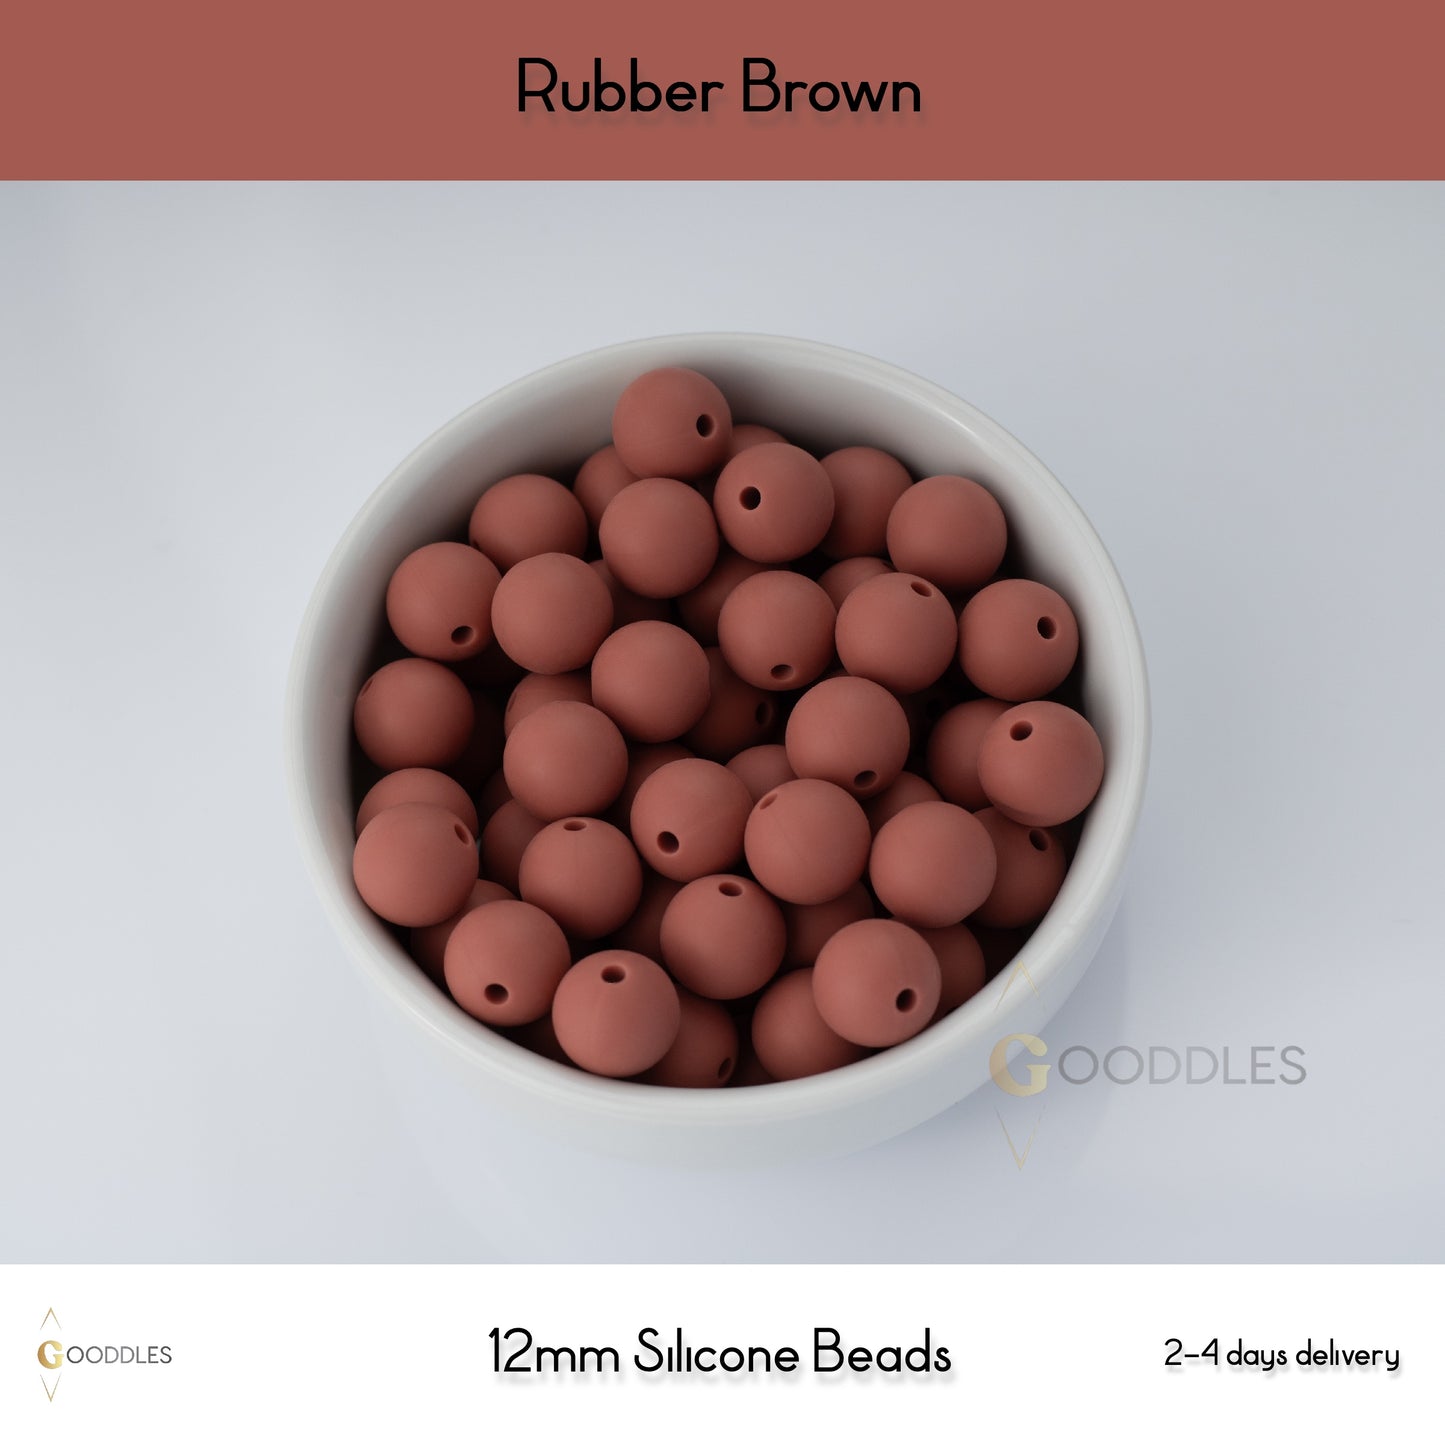 5pcs, Rubber Brown Silicone Beads Round Silicone Beads